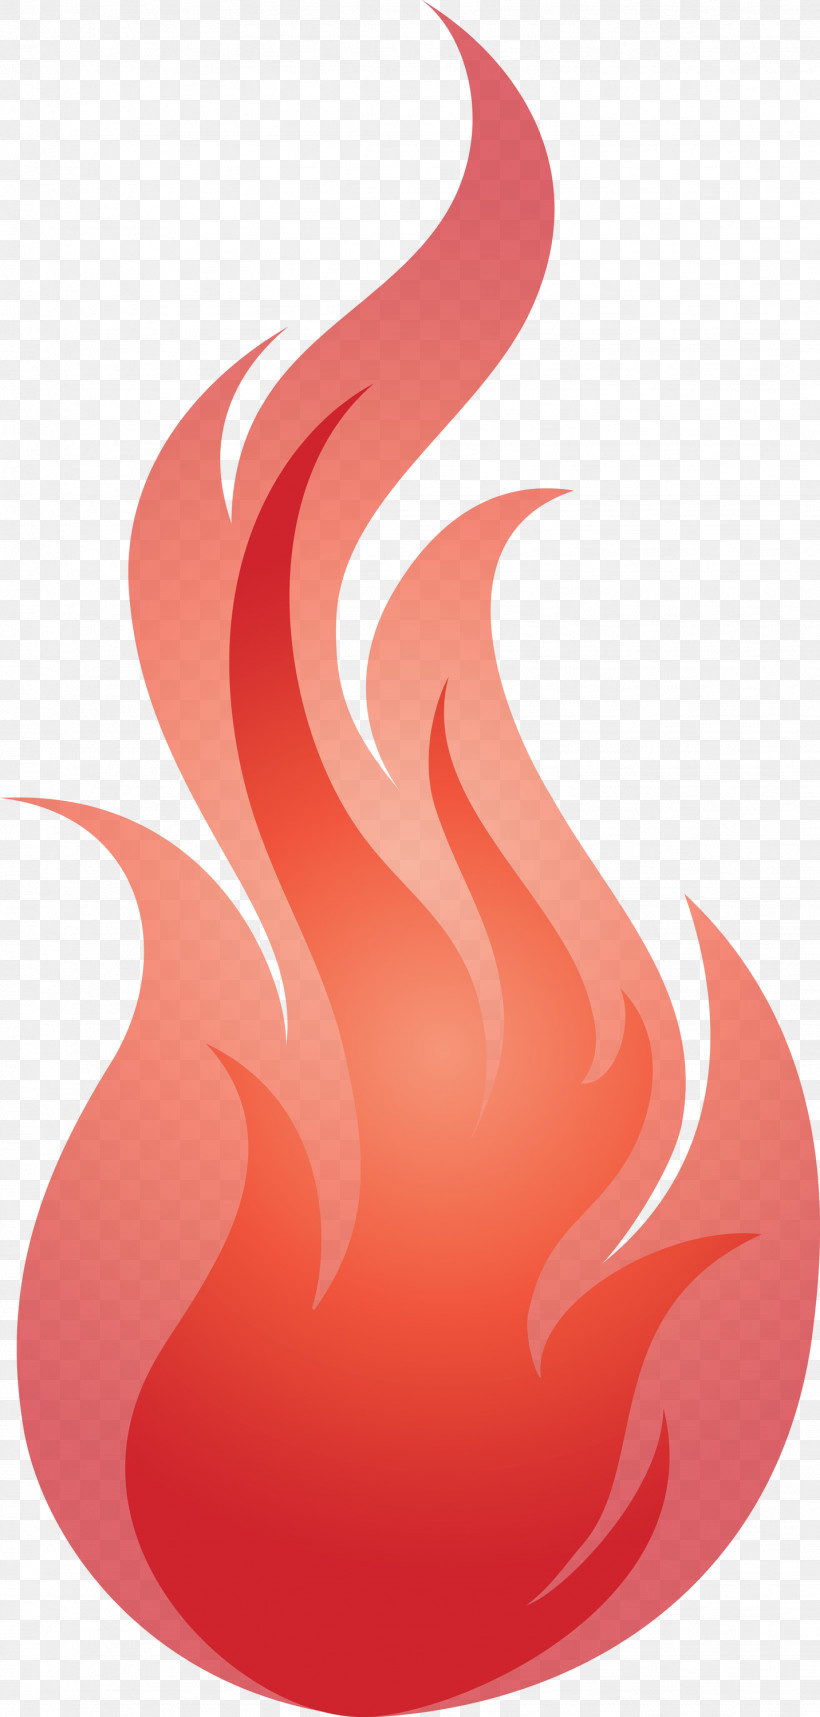 Fire Flame, PNG, 1432x2999px, Fire, Flame, Red Download Free